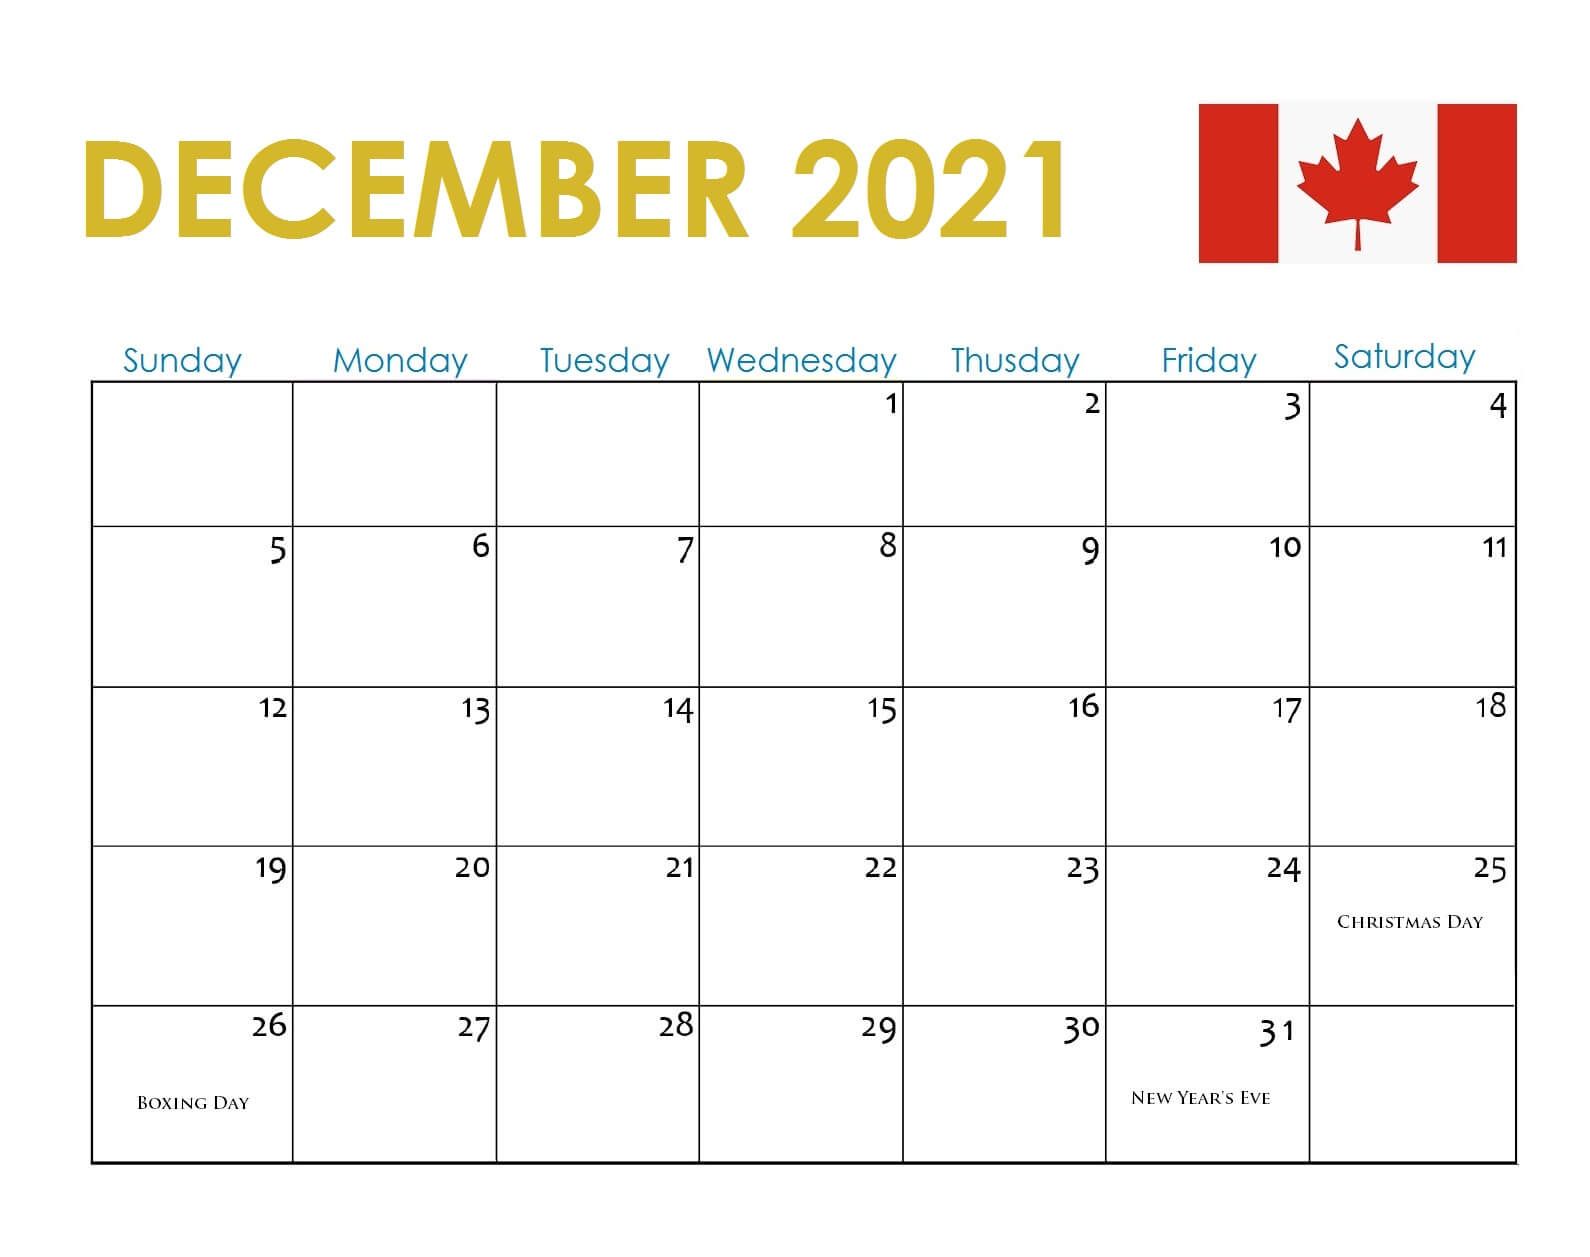 List Of Federal Holidays For 2021 And 2022